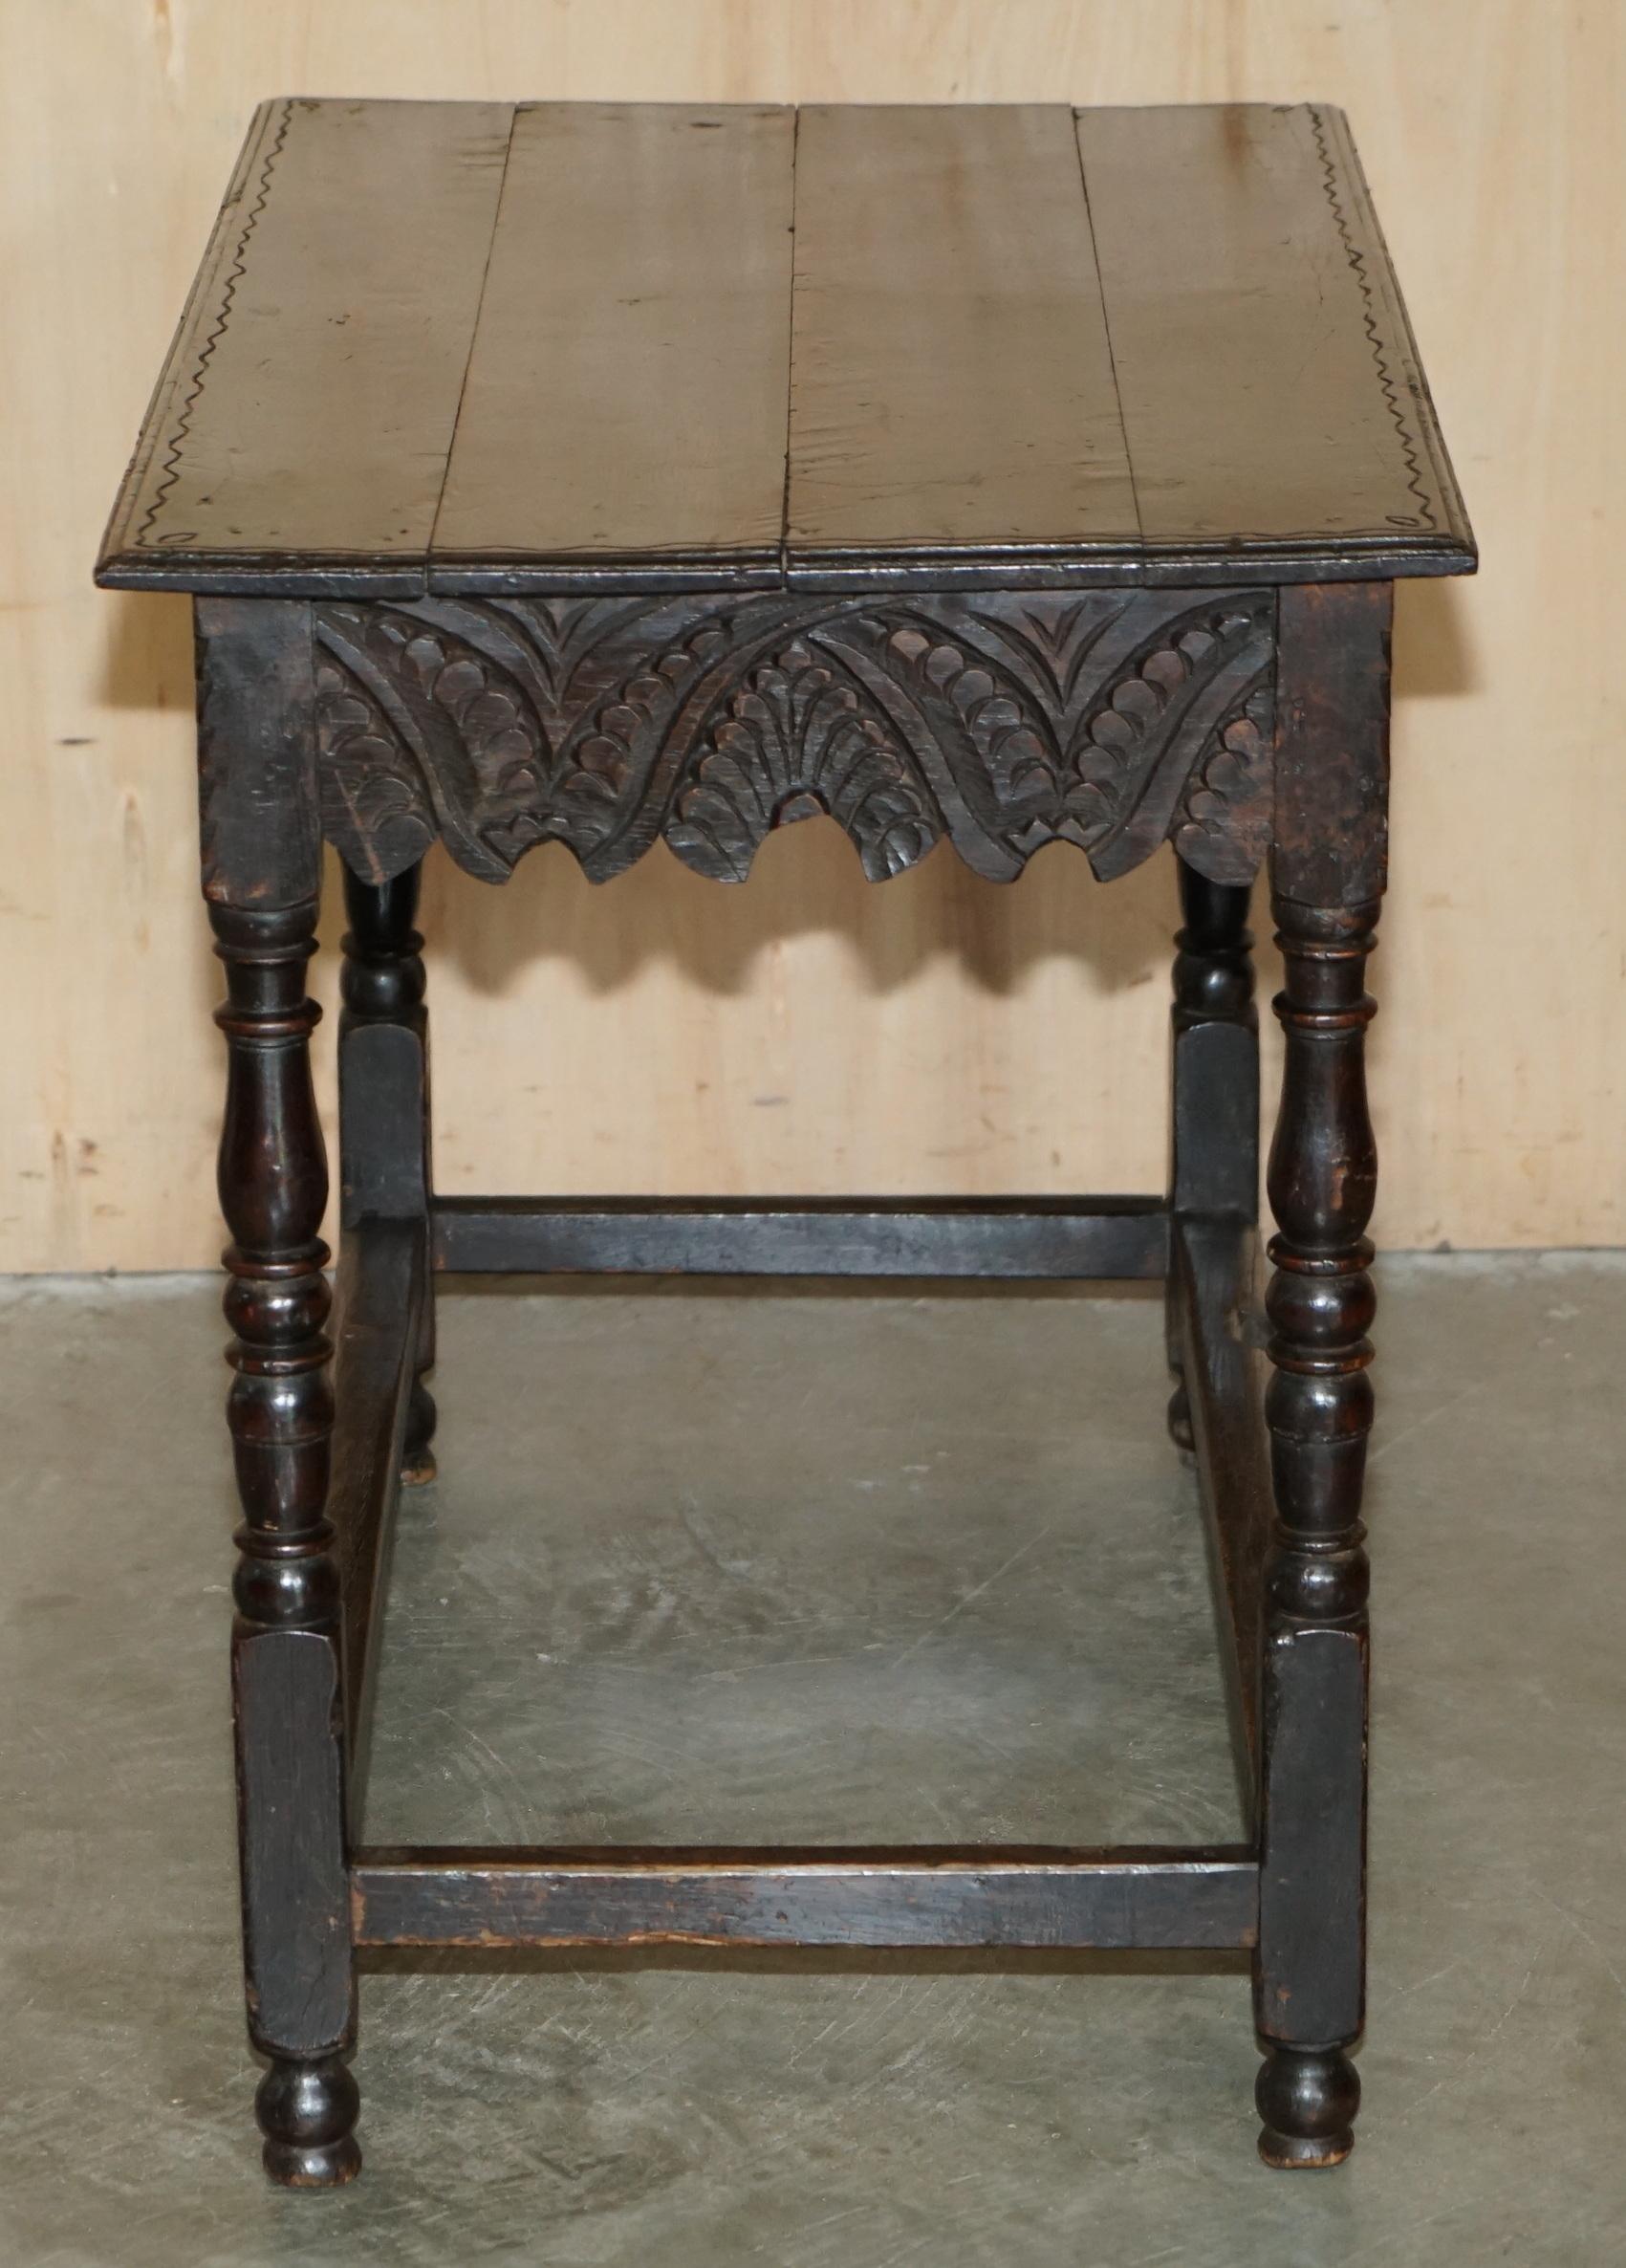 ANTIQUE ENGLISH 18TH CENTURY JACOBEAN CENTRE TABLE WiTH ORNATELY CARVED APRON For Sale 4